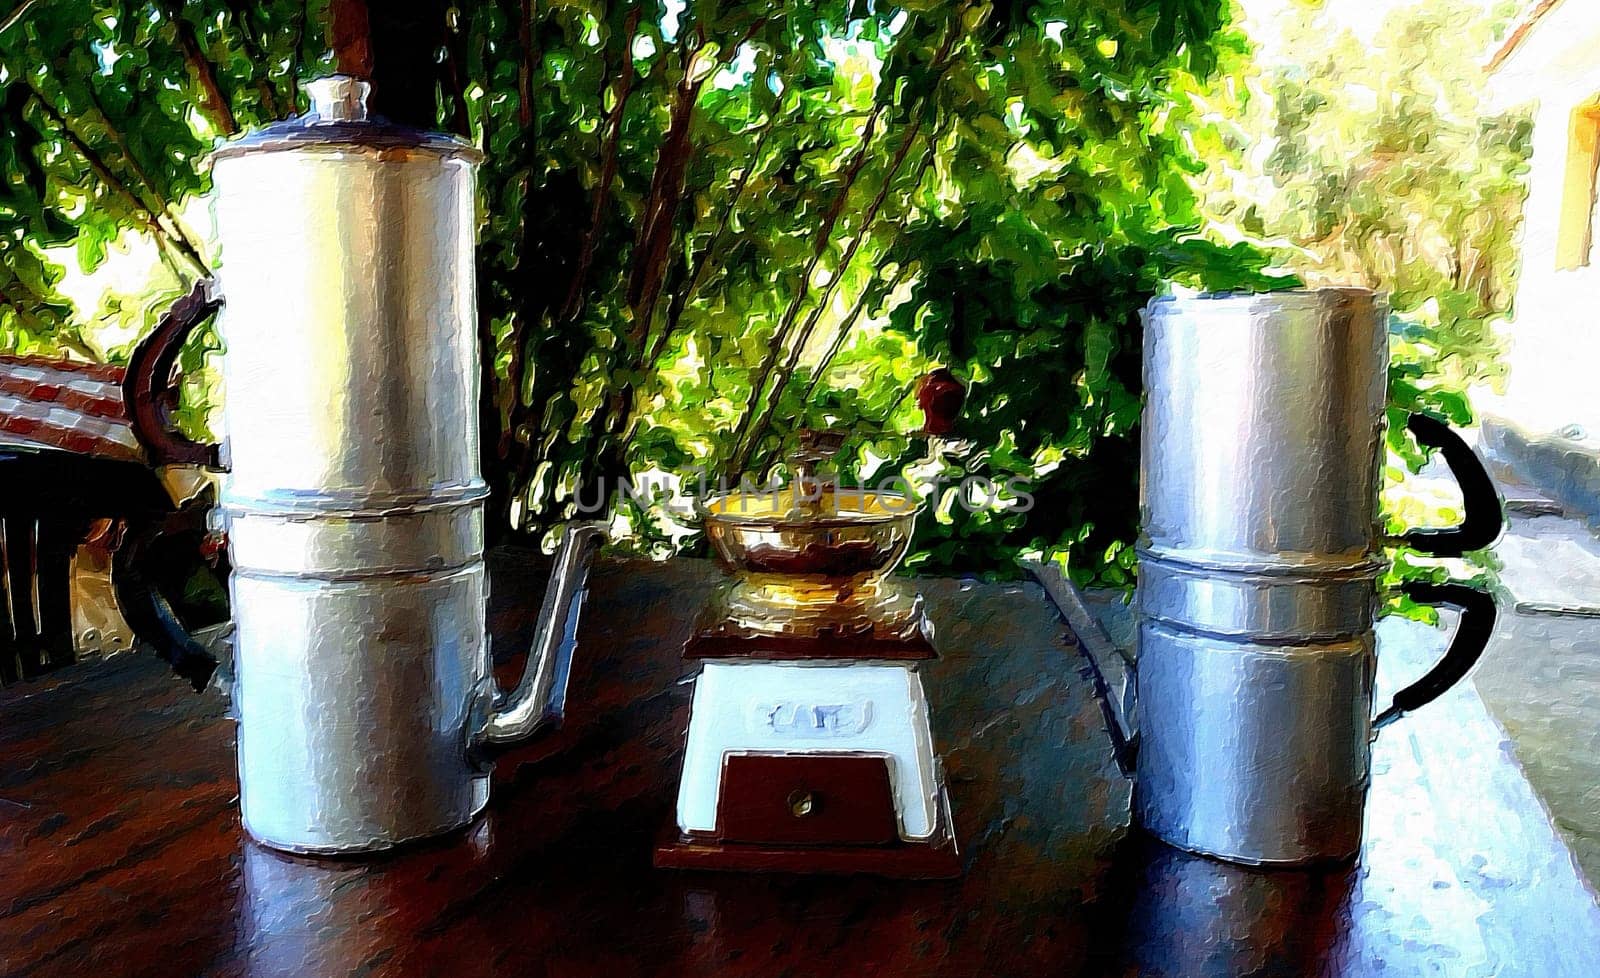 Two Neapolitan coffee machines and an antique coffee grinder on the table in the garden on a summer morning.